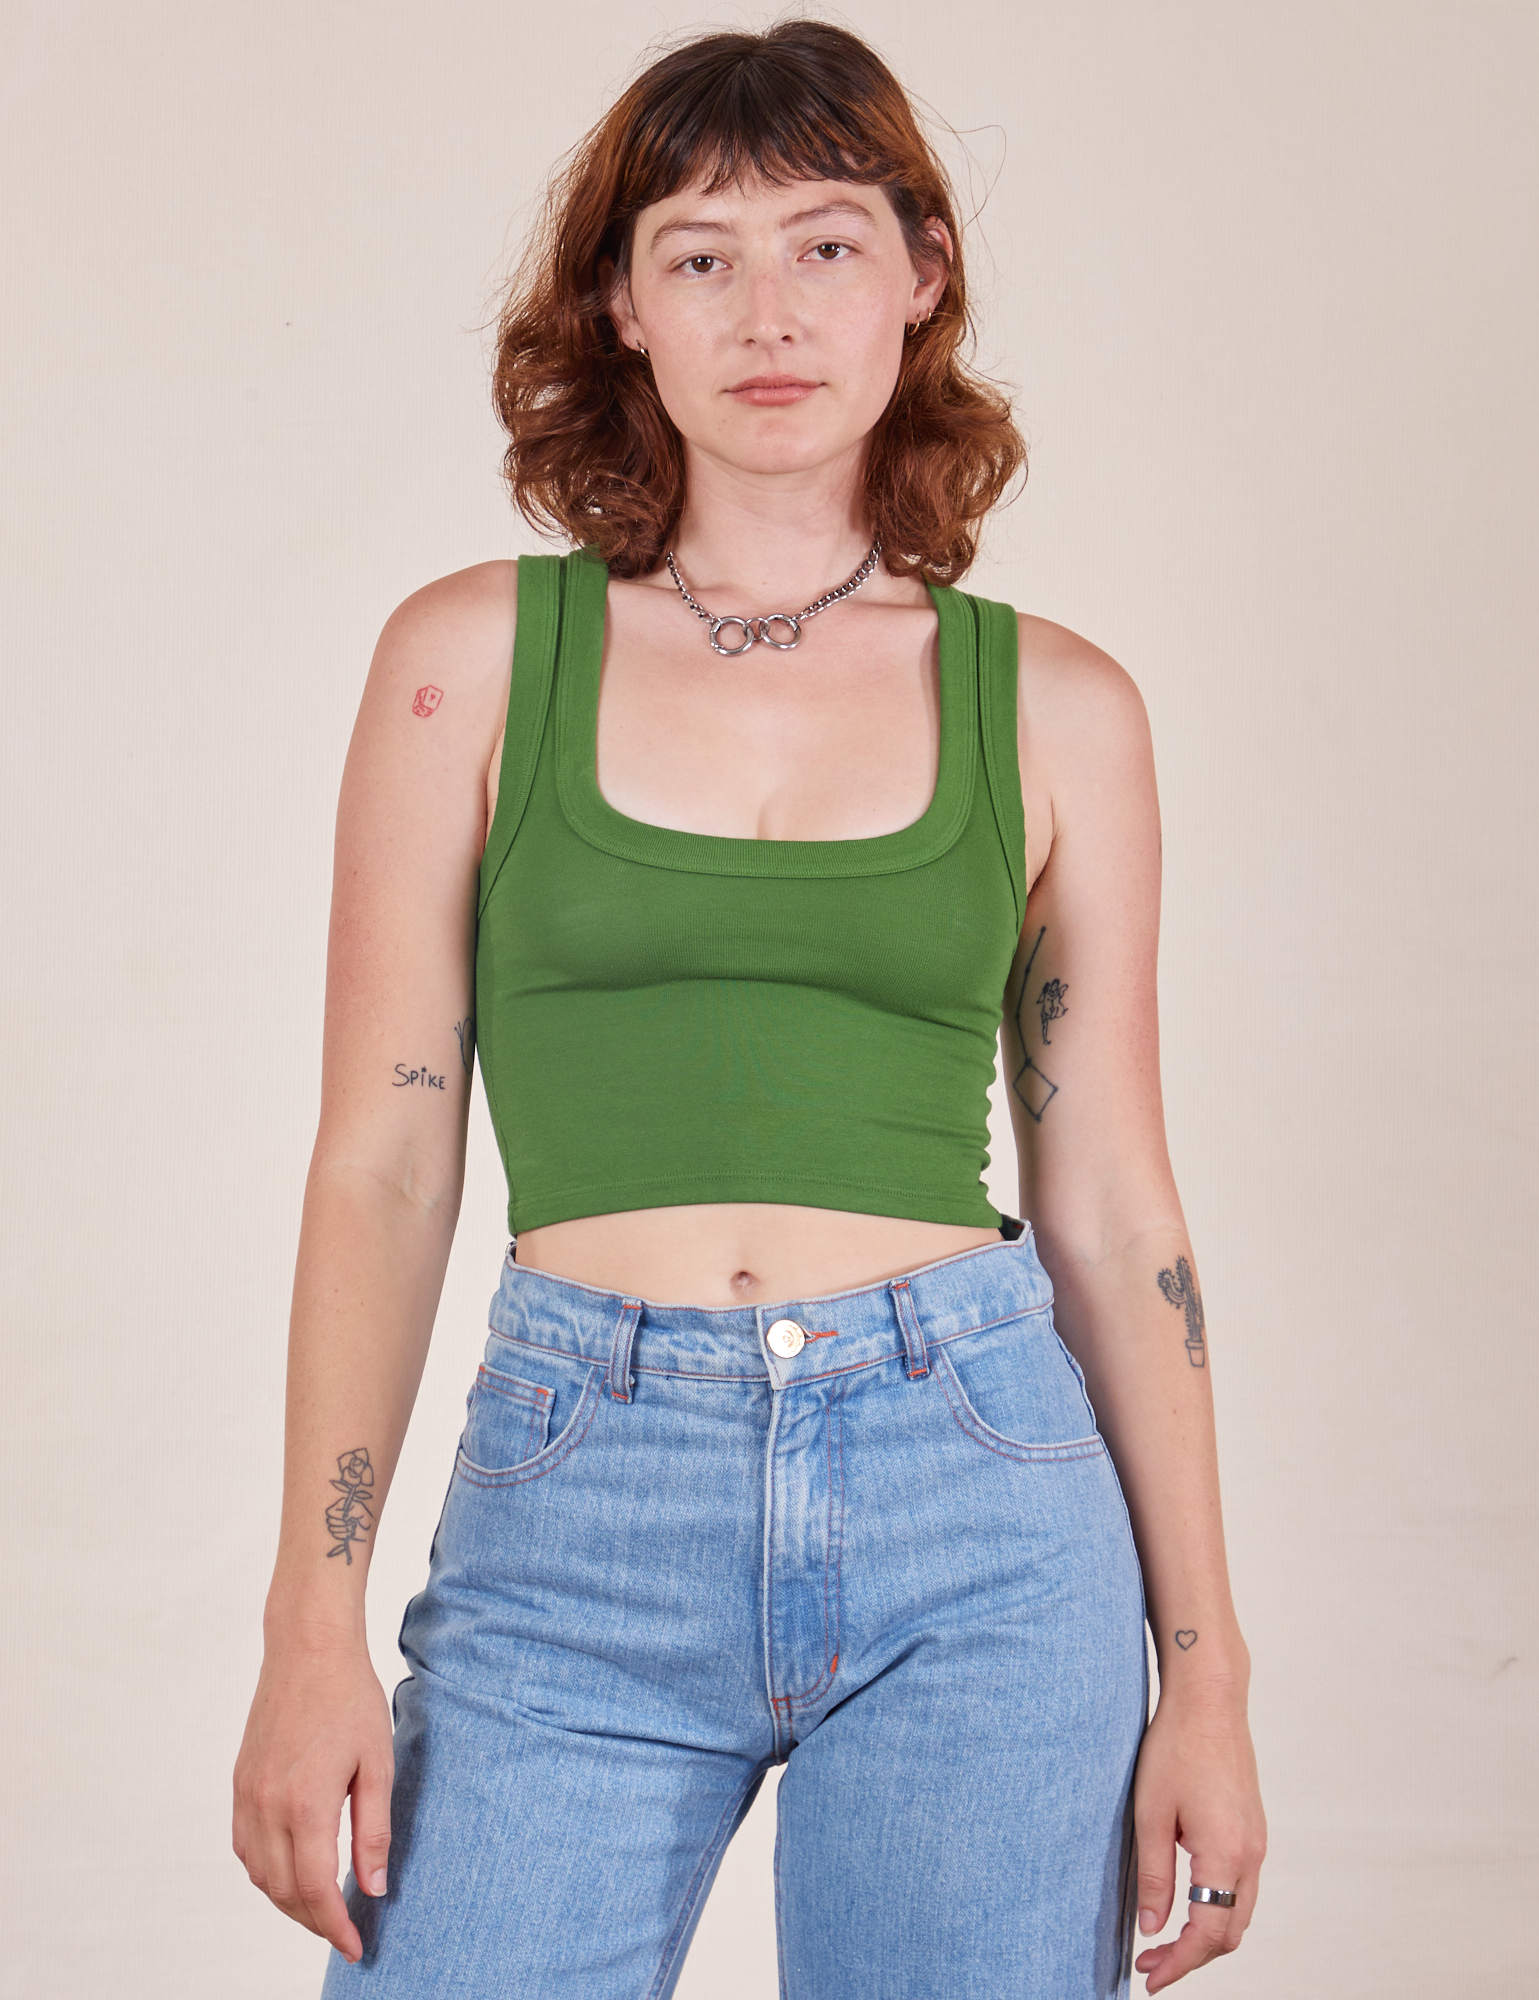 Alex is 5&#39;8&quot; and wearing P Cropped Tank Top in Lawn Green